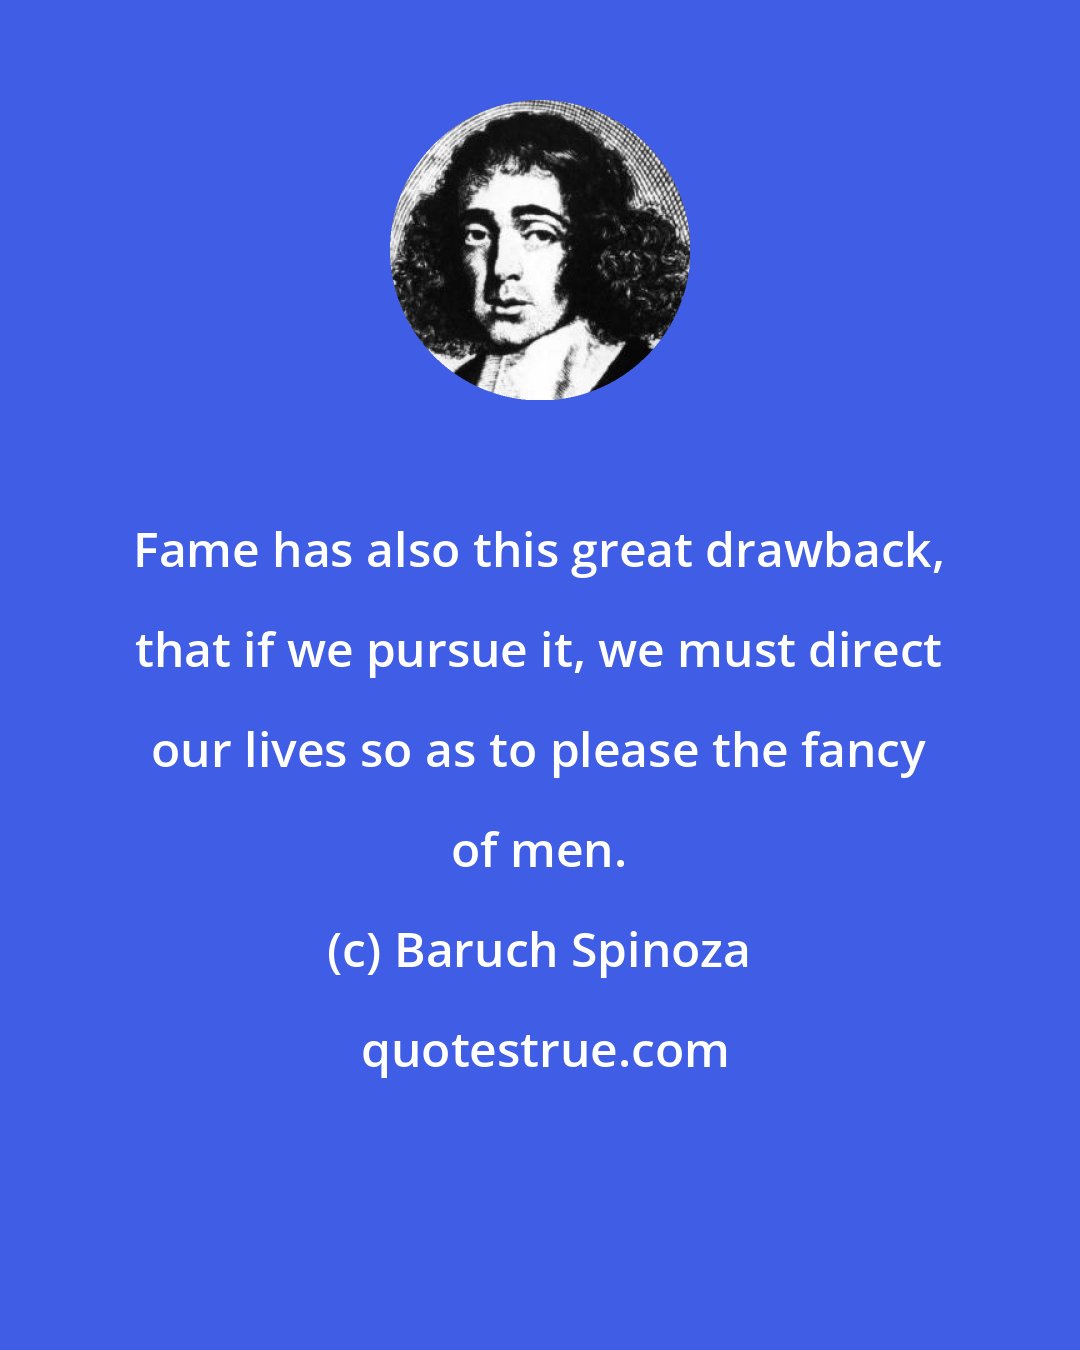 Baruch Spinoza: Fame has also this great drawback, that if we pursue it, we must direct our lives so as to please the fancy of men.